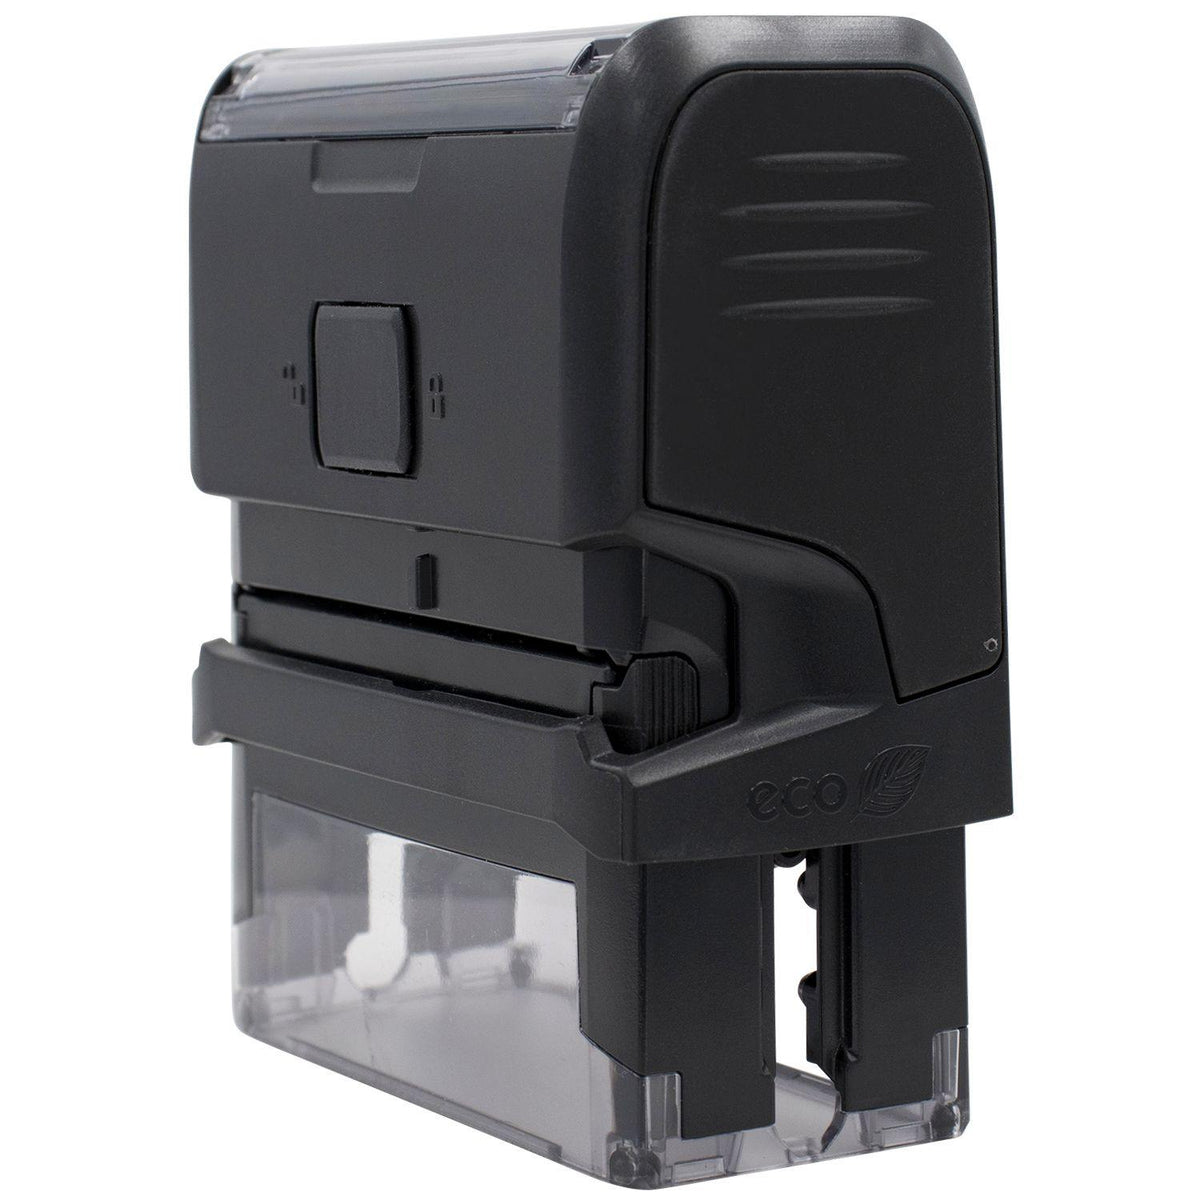 Self-Inking Temporarily Closed Stamp - Engineer Seal Stamps - Brand_Trodat, Impression Size_Small, Stamp Type_Self-Inking Stamp, Type of Use_Medical Office